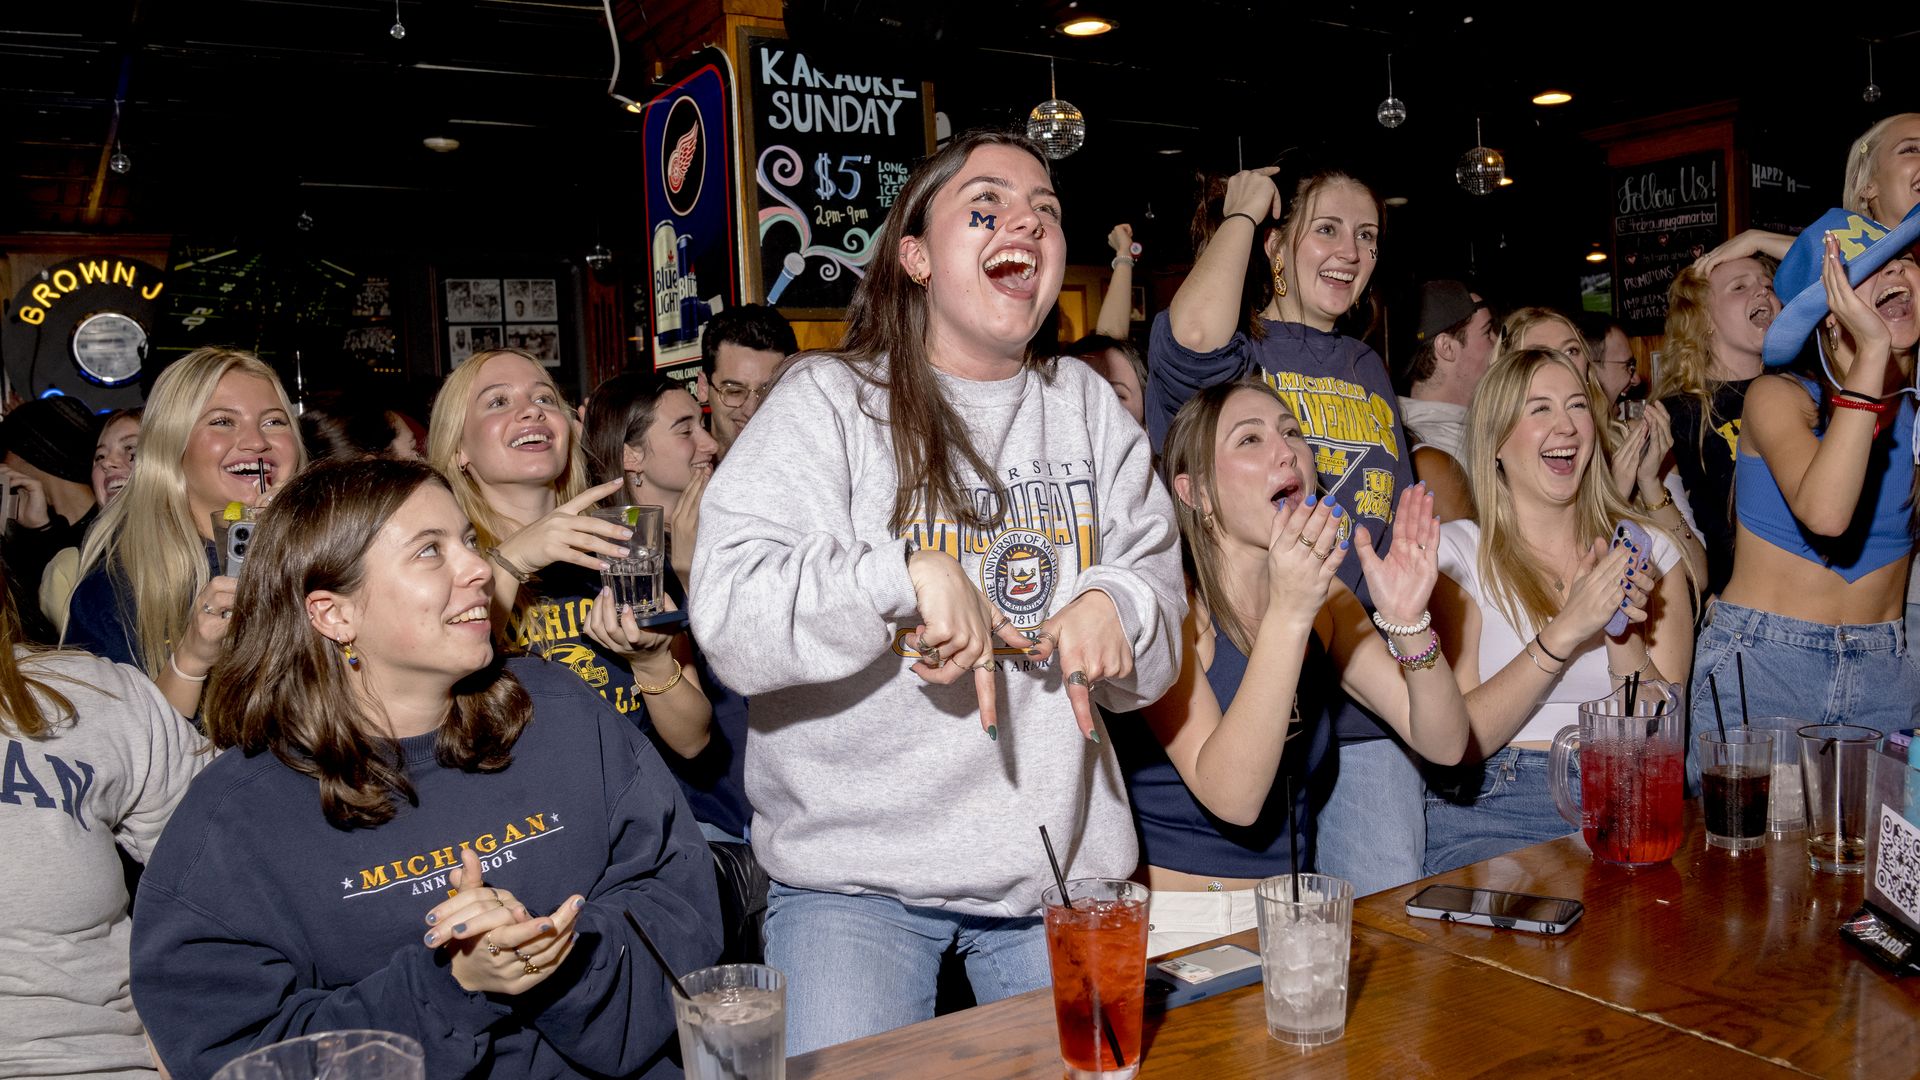 Michigan Wolverines fans react while watching the 2024 College Football Playoff National Championship Game against the Washington Huskies on Jan. 08, at the Brown Jug Restaurant in Ann Arbor. (Photo by Nic Antaya/Getty Images)